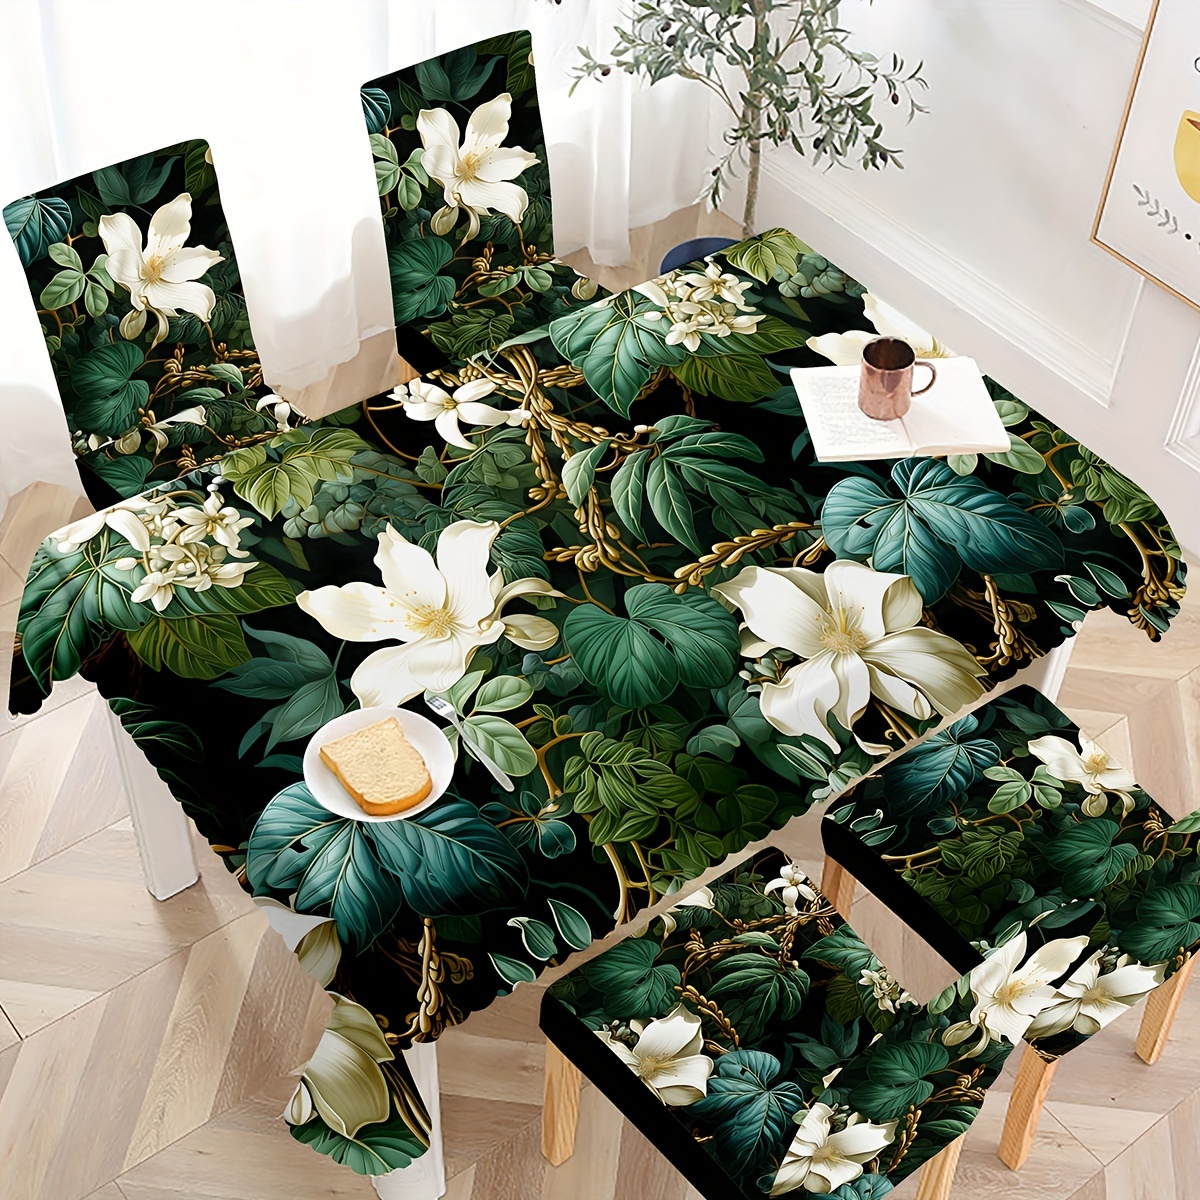 

（jit Product）4pc Printed Floral Chair Covers And 1pc Tablecloth Set - Easy To Care, Toward Dining, Party Decoration And Gifts